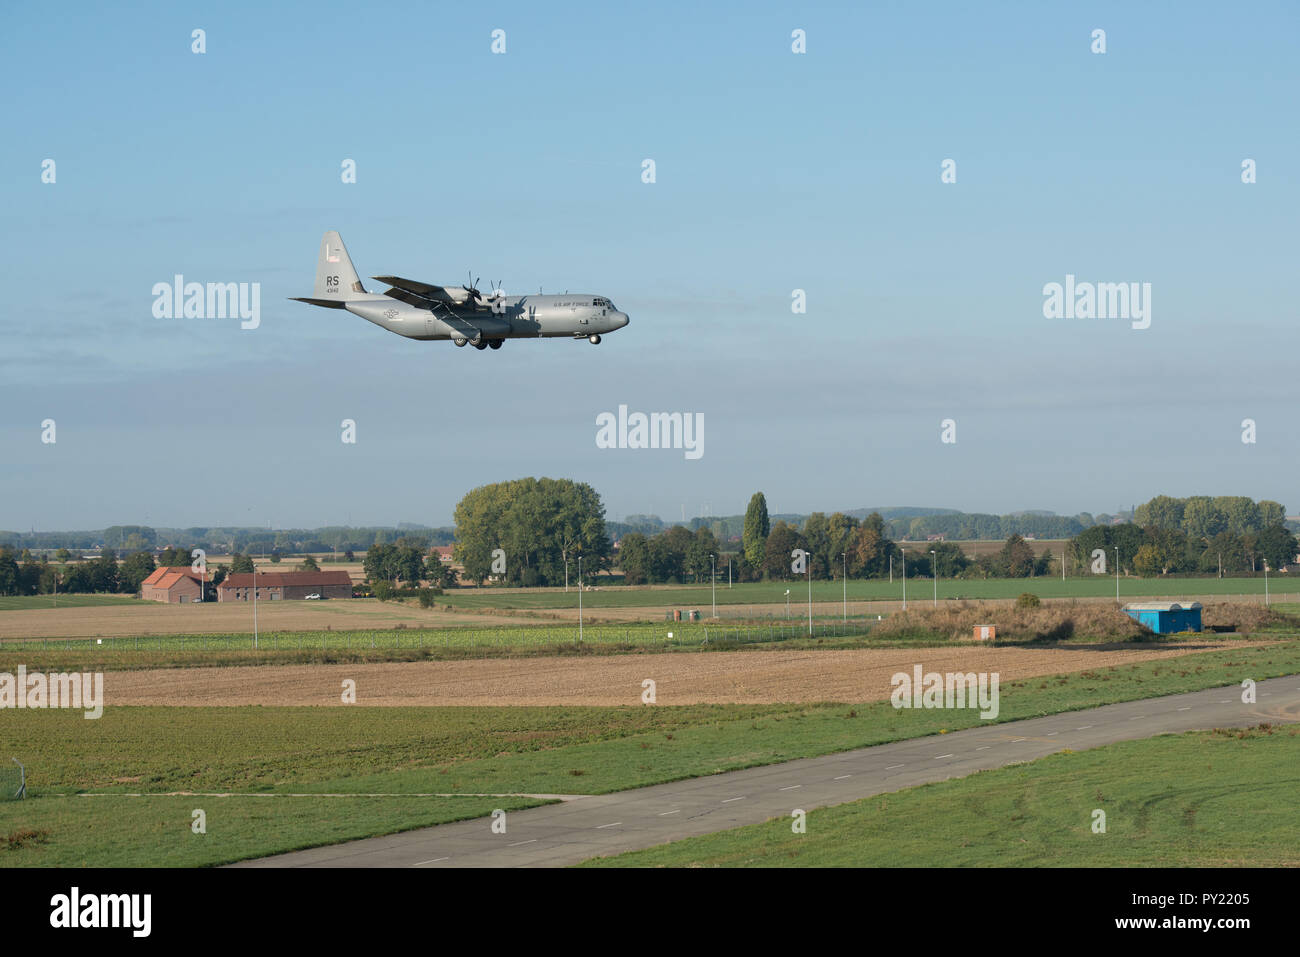 A C-130J Super Hercules of the 86th Airlift Wing, descends on Landing Zone Charlie, on SHAPE Air Field on Chièvres Air Base, Belgium, Oct. 4, 2018. The jump's goal was to validate the use of Chièvres Drop Zone to allow more NATO missions on the airfield. (U.S. Army photo by Visual Information Specialist Pierre-Etienne Courtejoie) Stock Photo